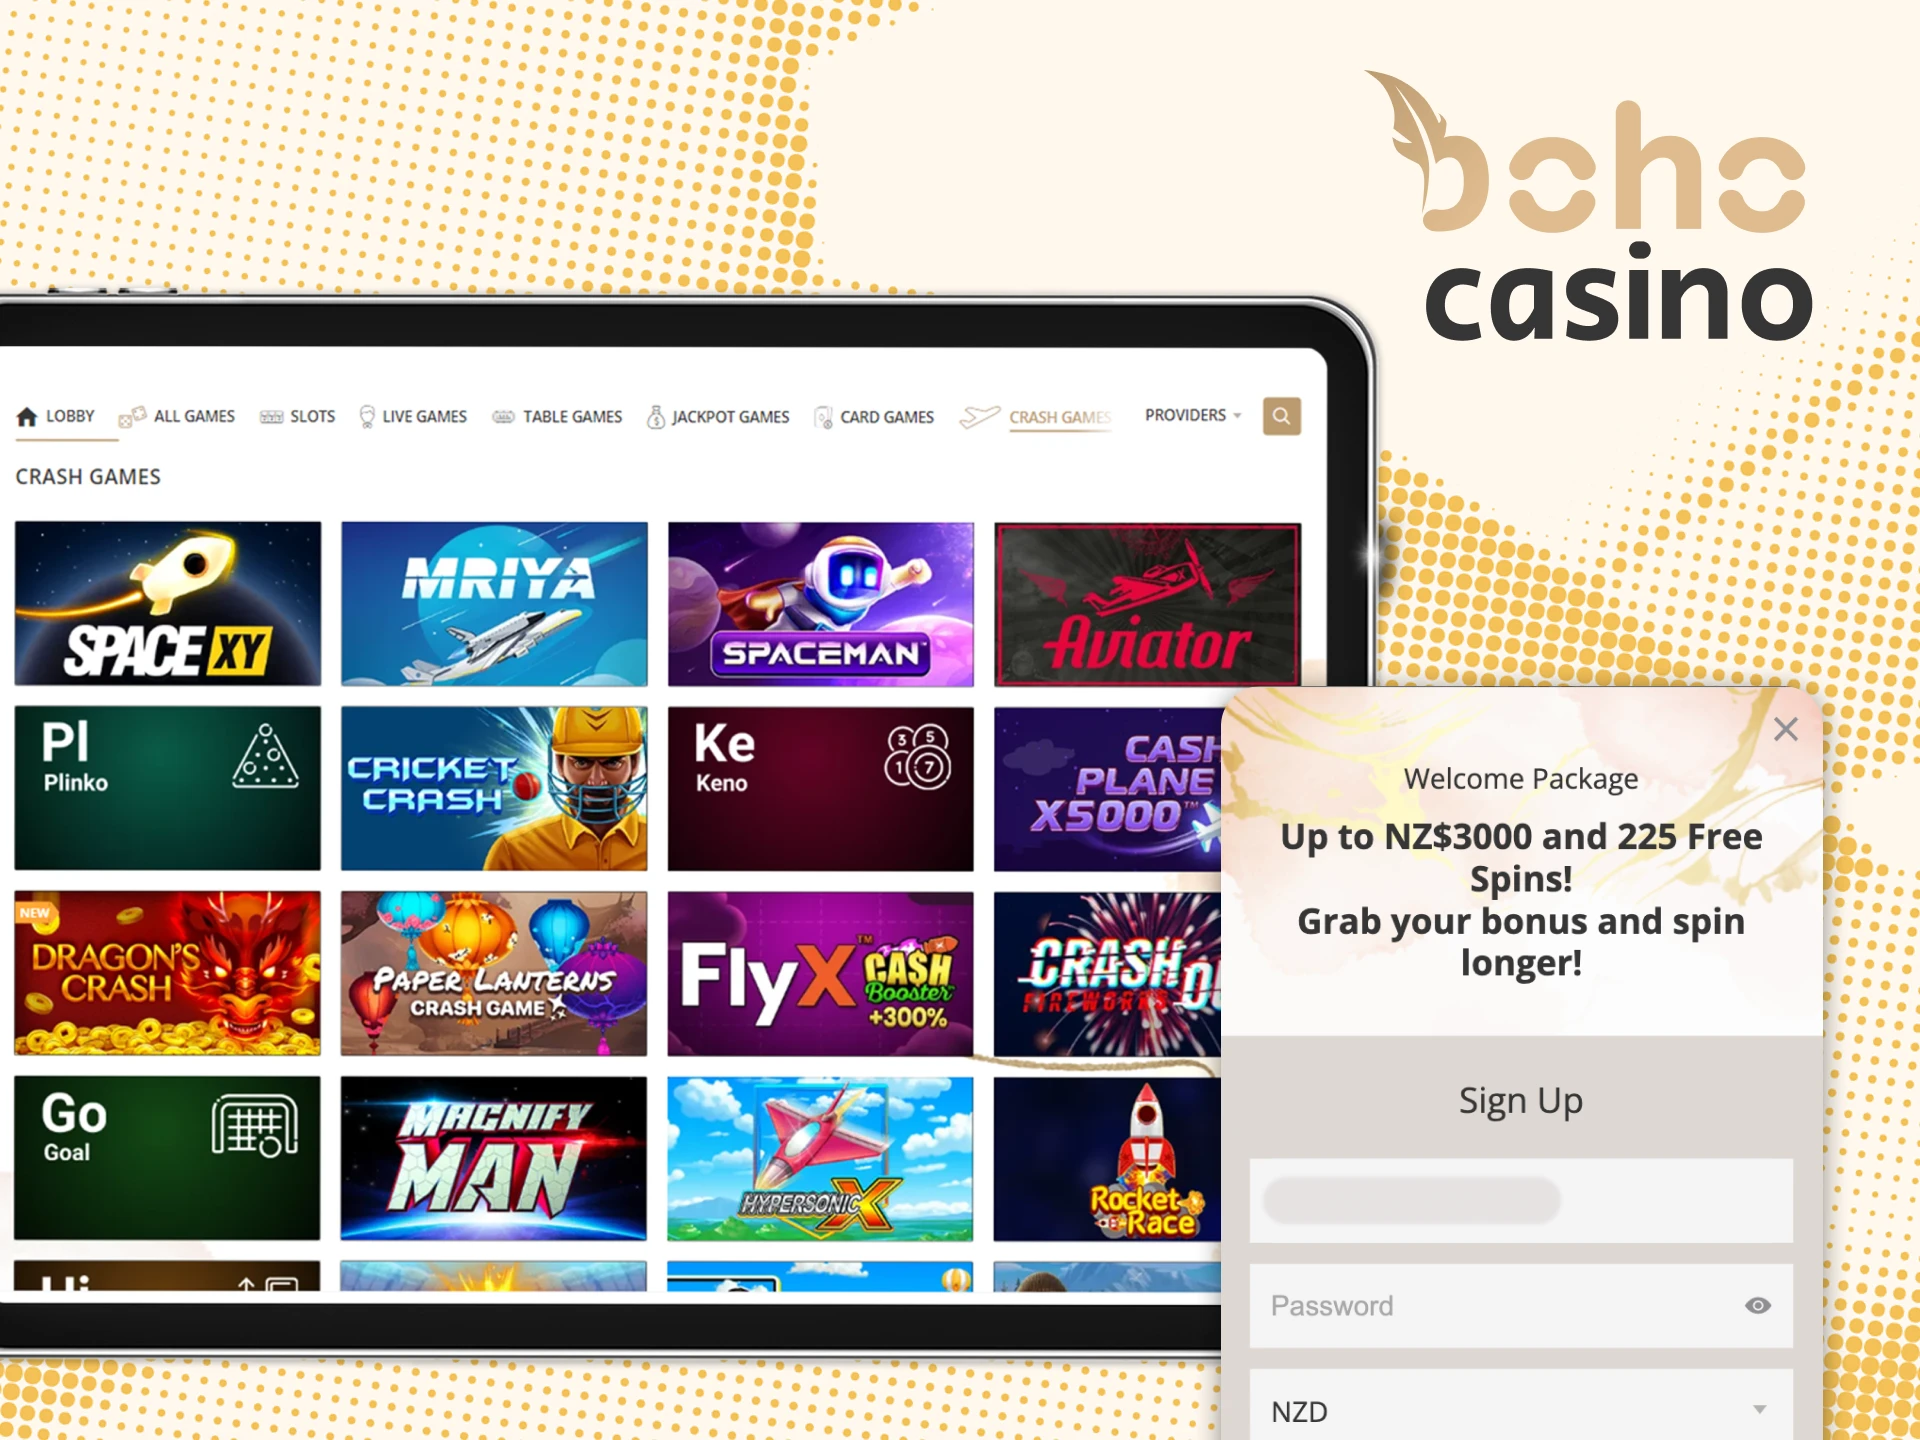 Fill out the registration form to start playing crash games at Boho Casino.